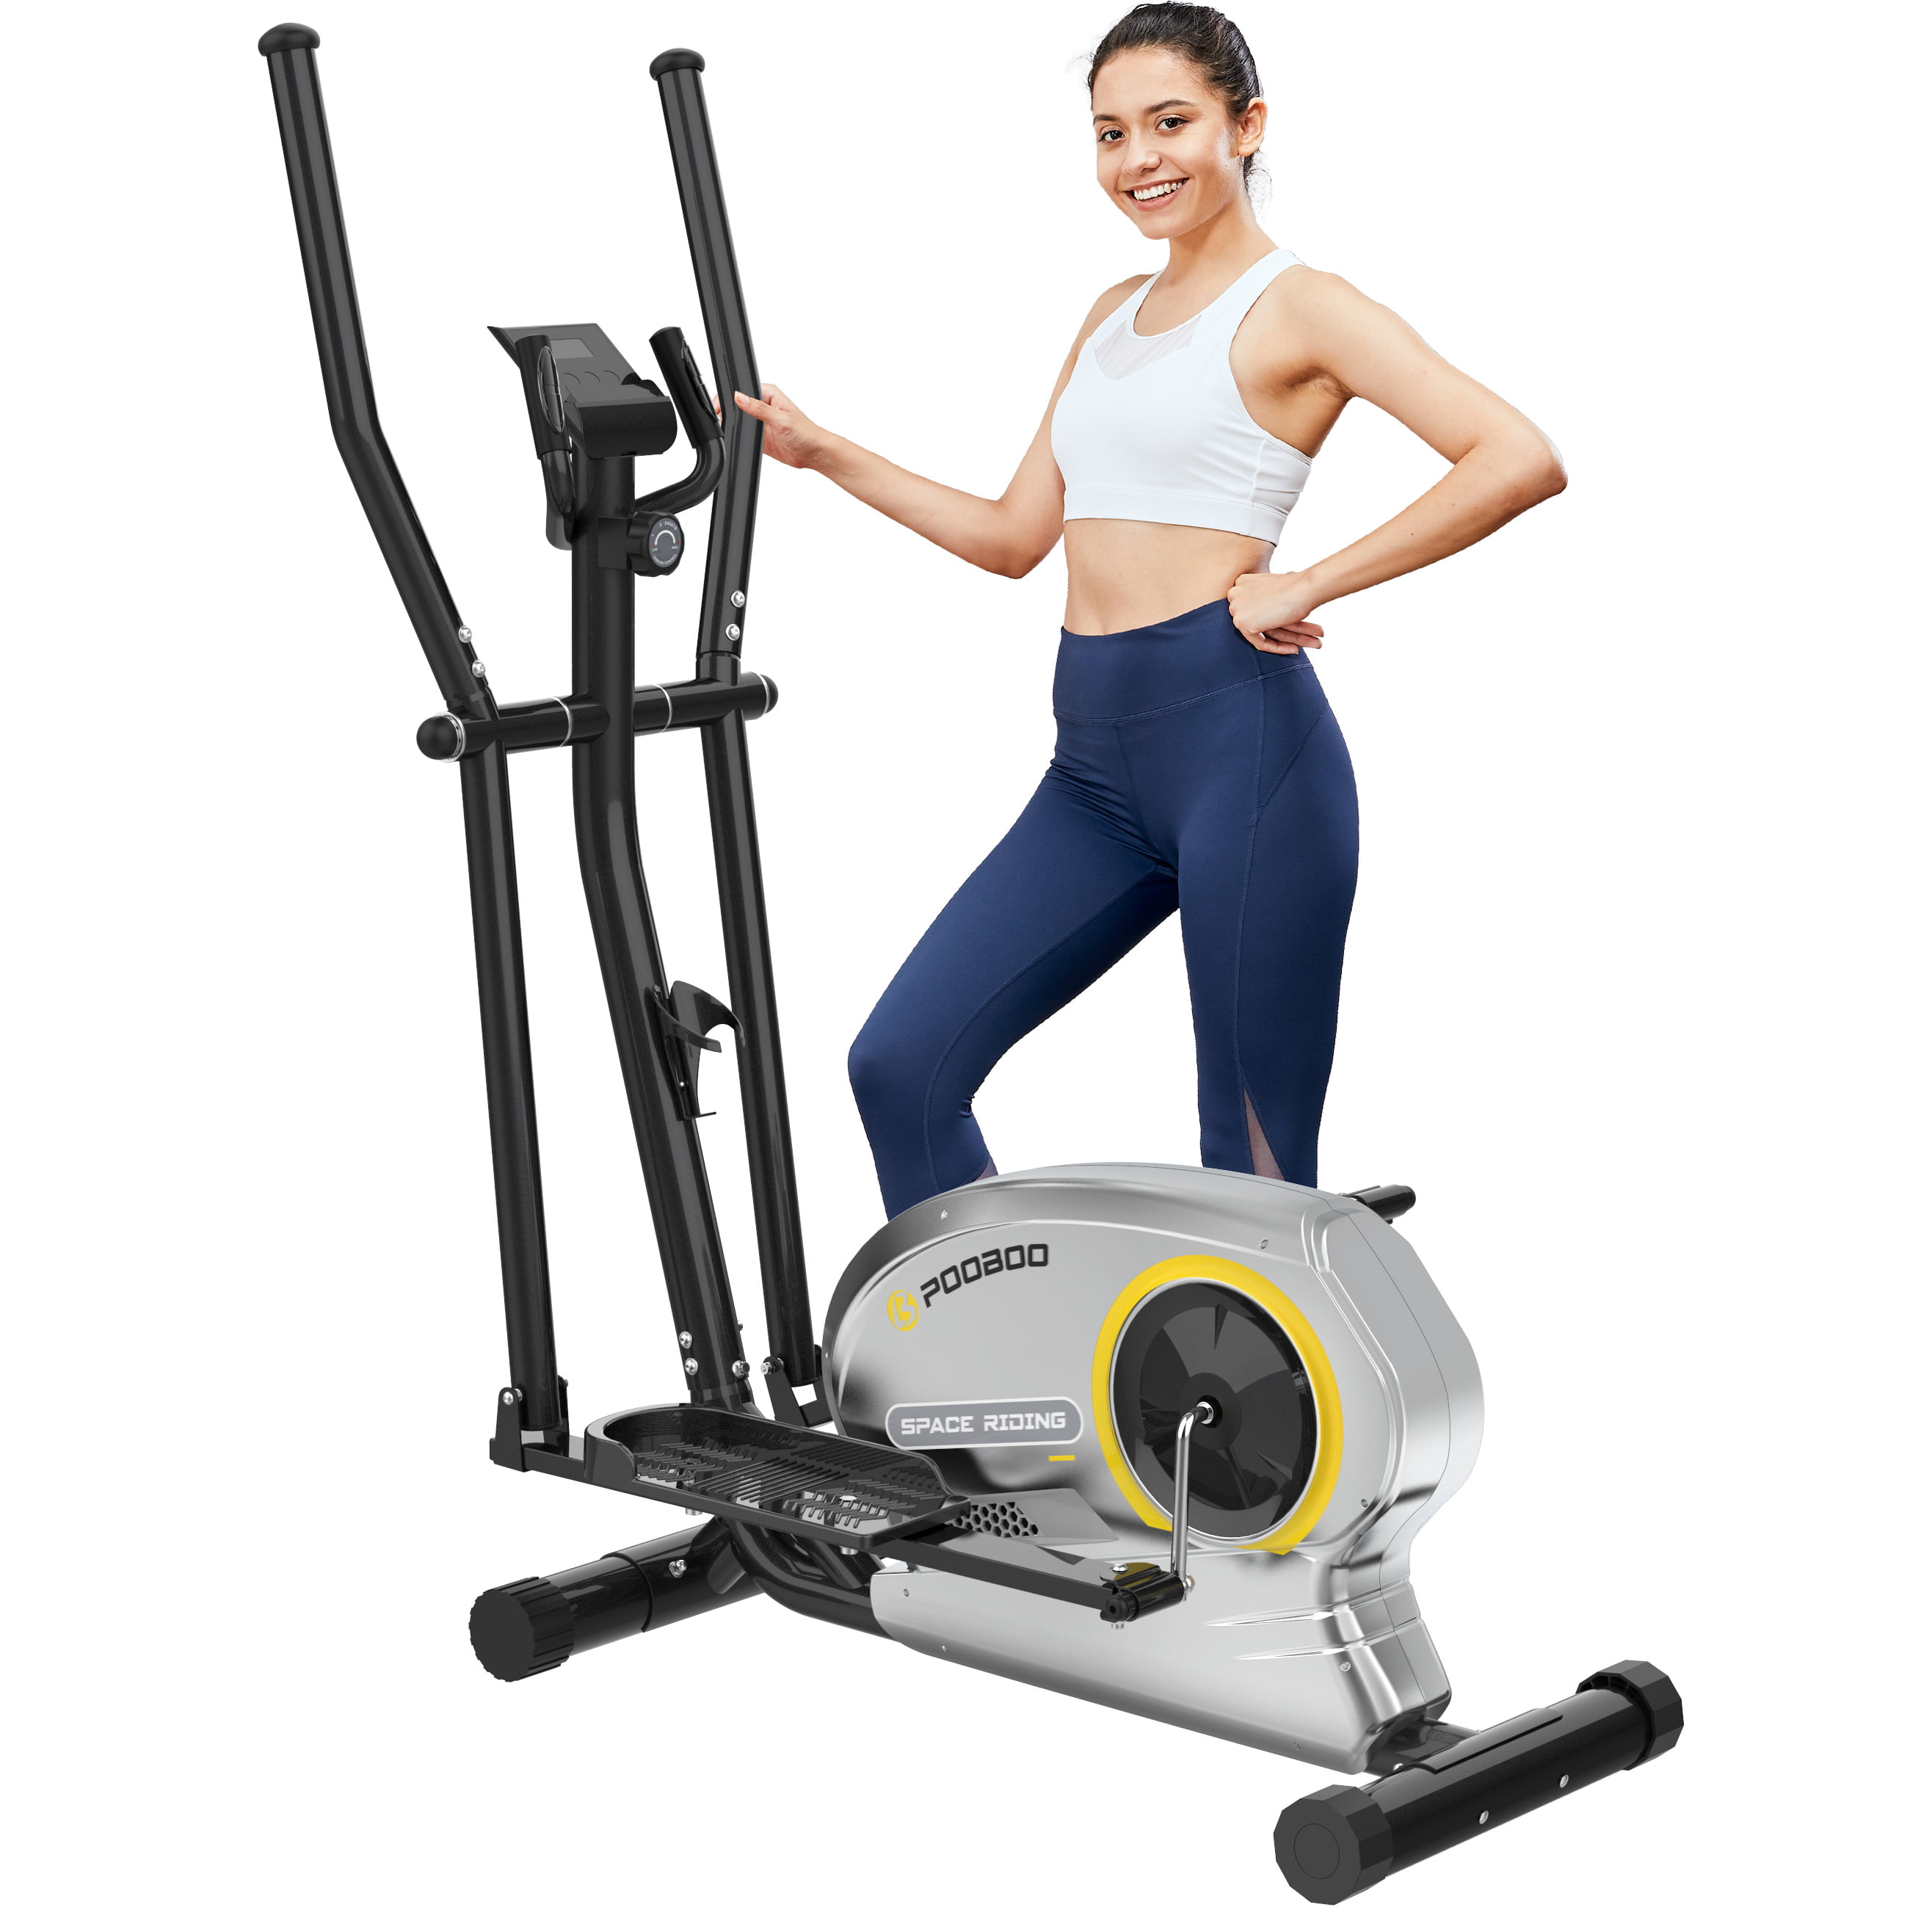 pooboo Elliptical Machine Magnetic Elliptical Trainers for Home Use Indoor Elliptical Exercise Machine 350lbs Capacity 